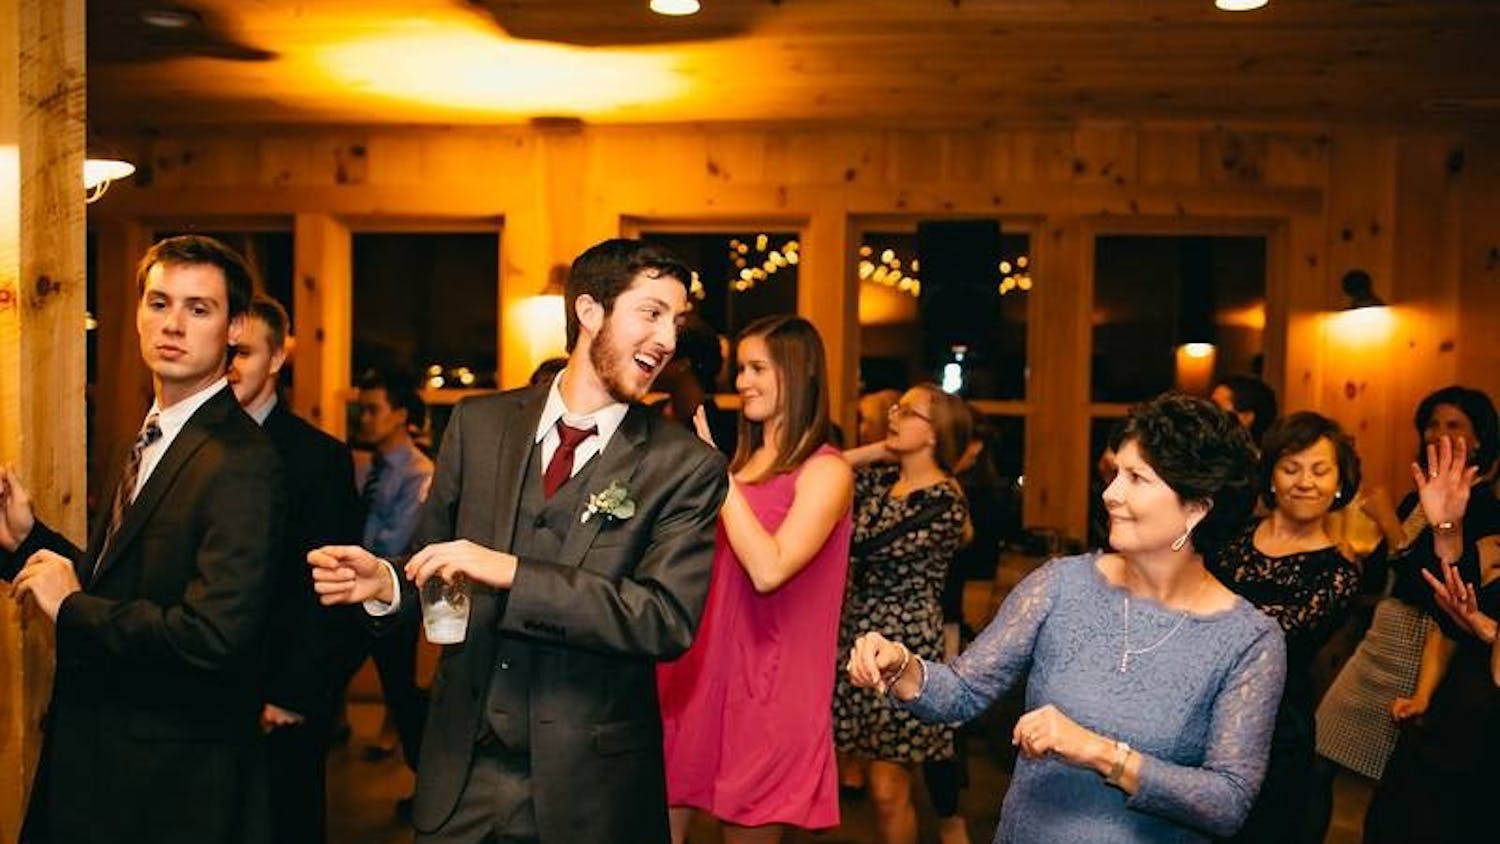 Junior&nbsp;Stephen Rich (center) and his mom, Biff, drinking La Croix and dancing to "Soulja Boy."Photo courtesy of Stephen Rich